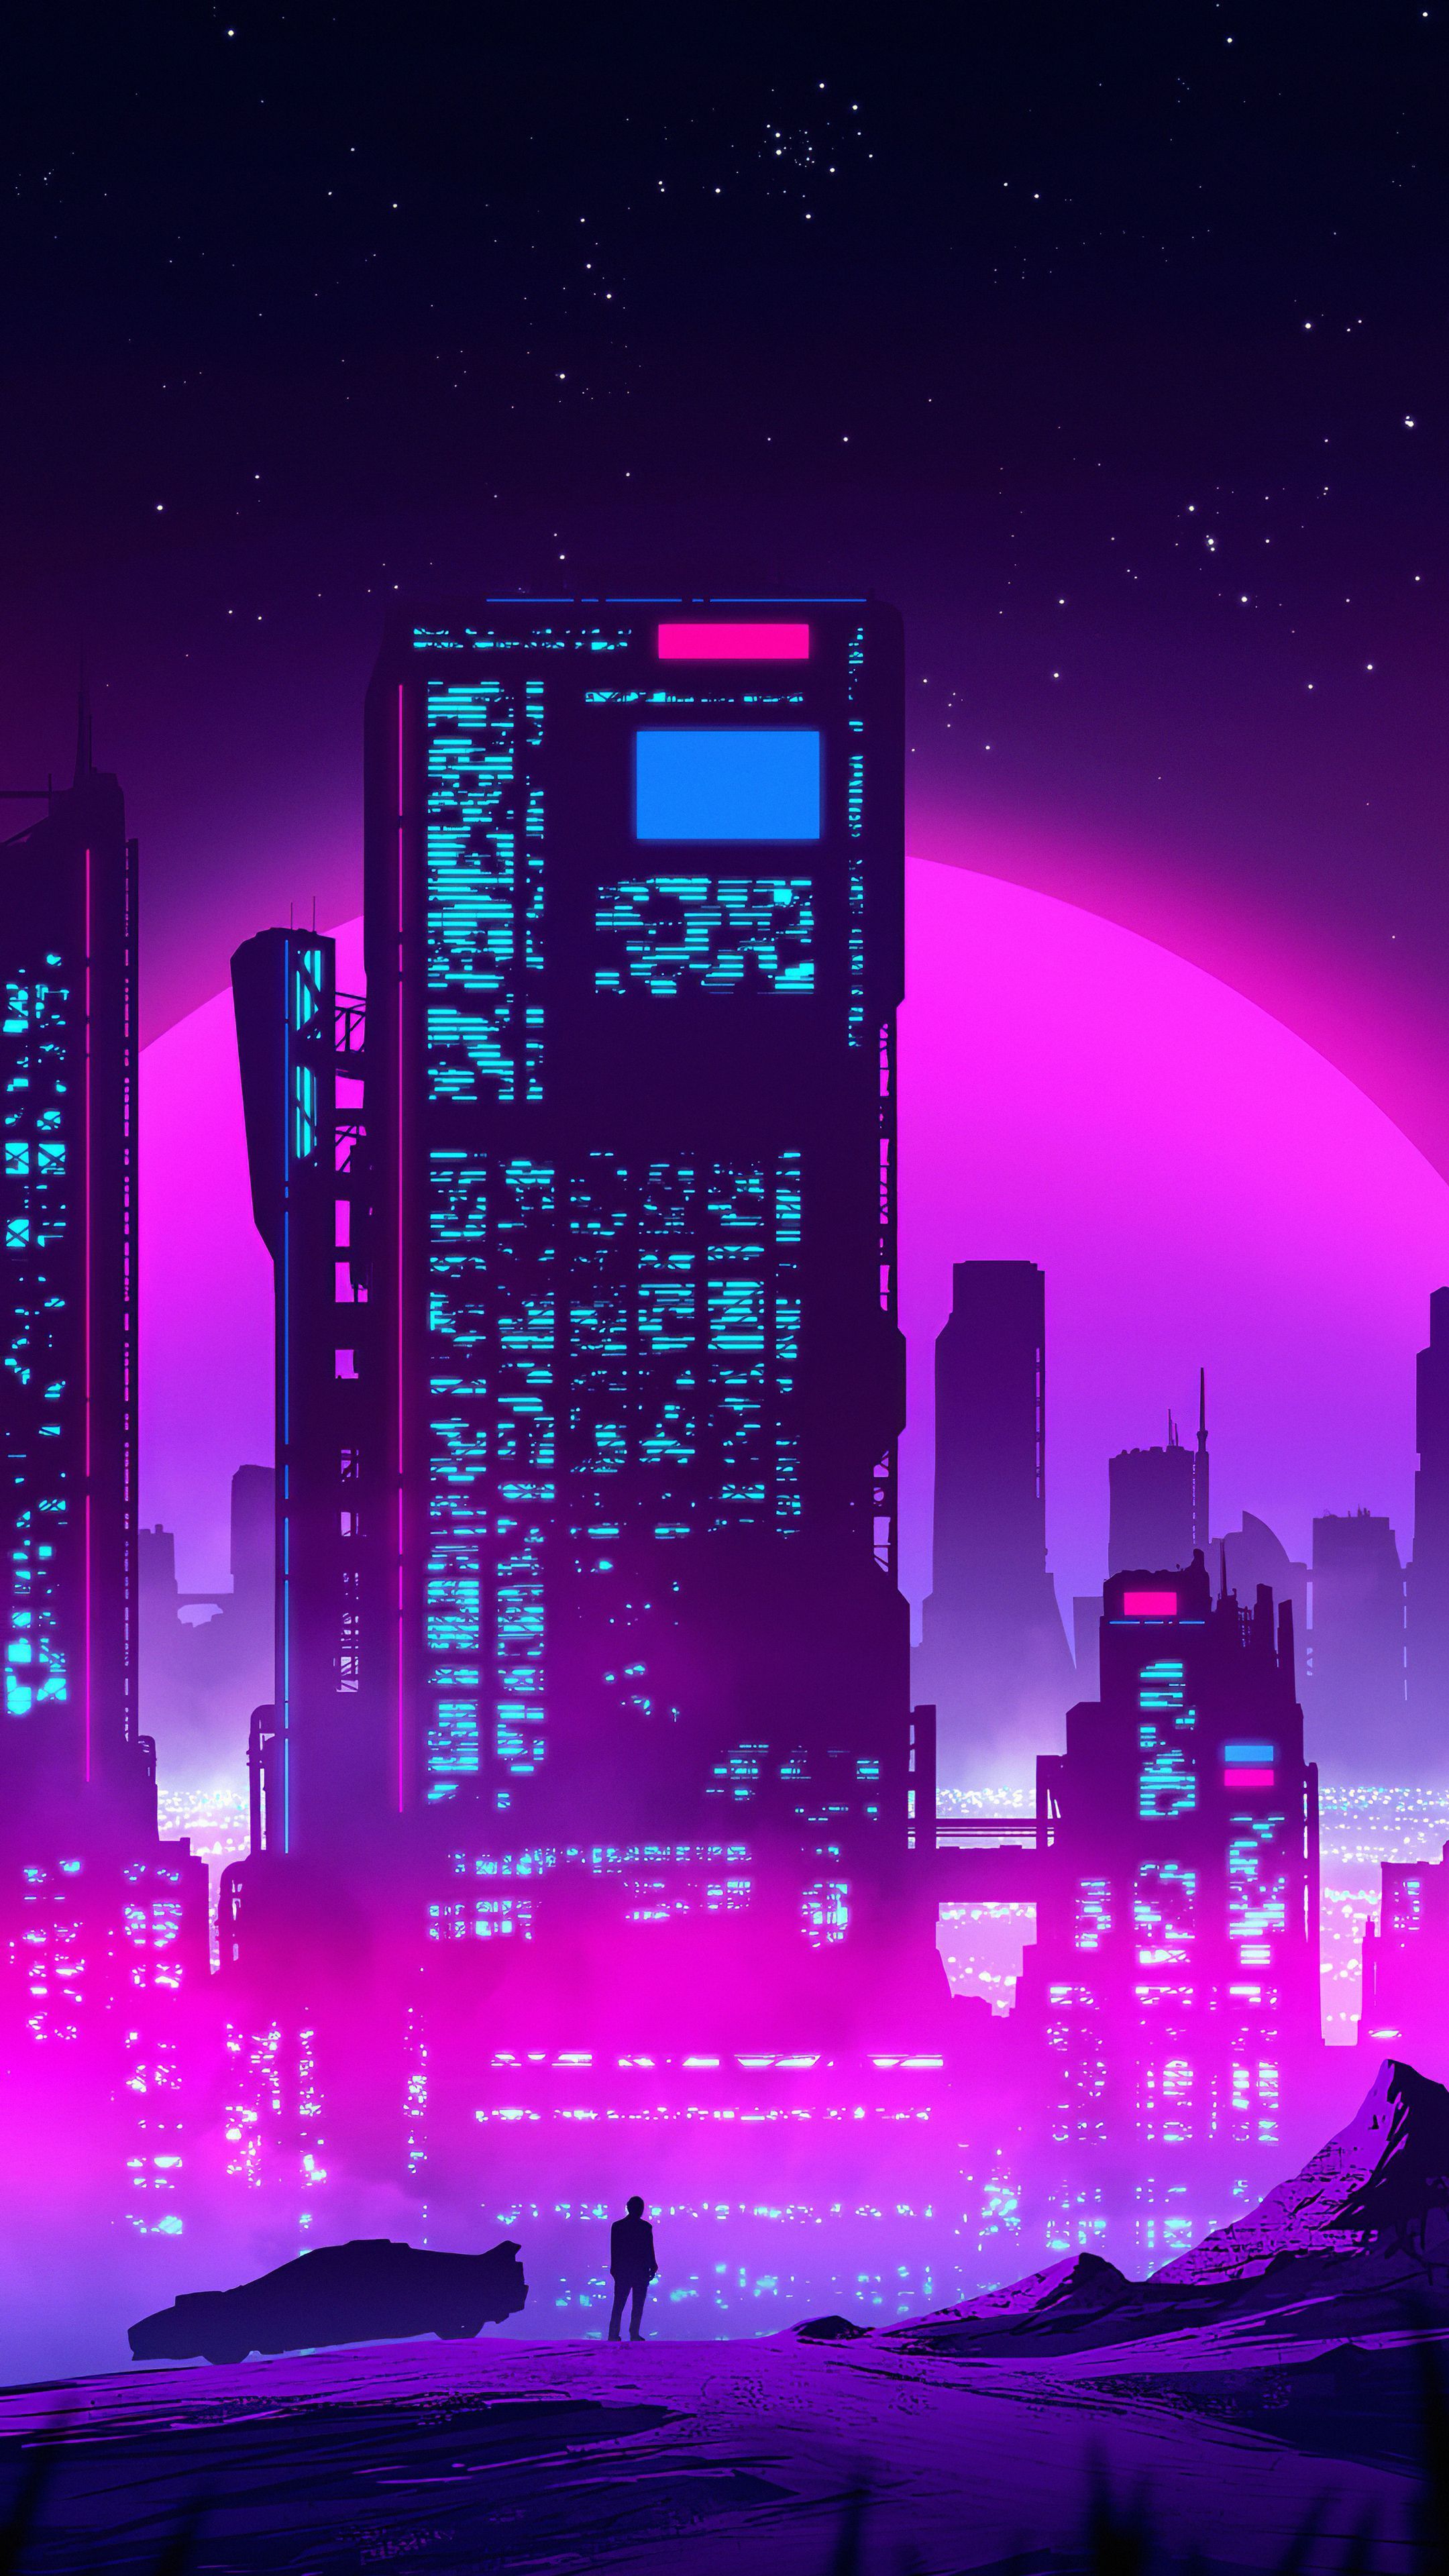 Synthwave Mobile Wallpaper, HD Synthwave Background, Free Image Download